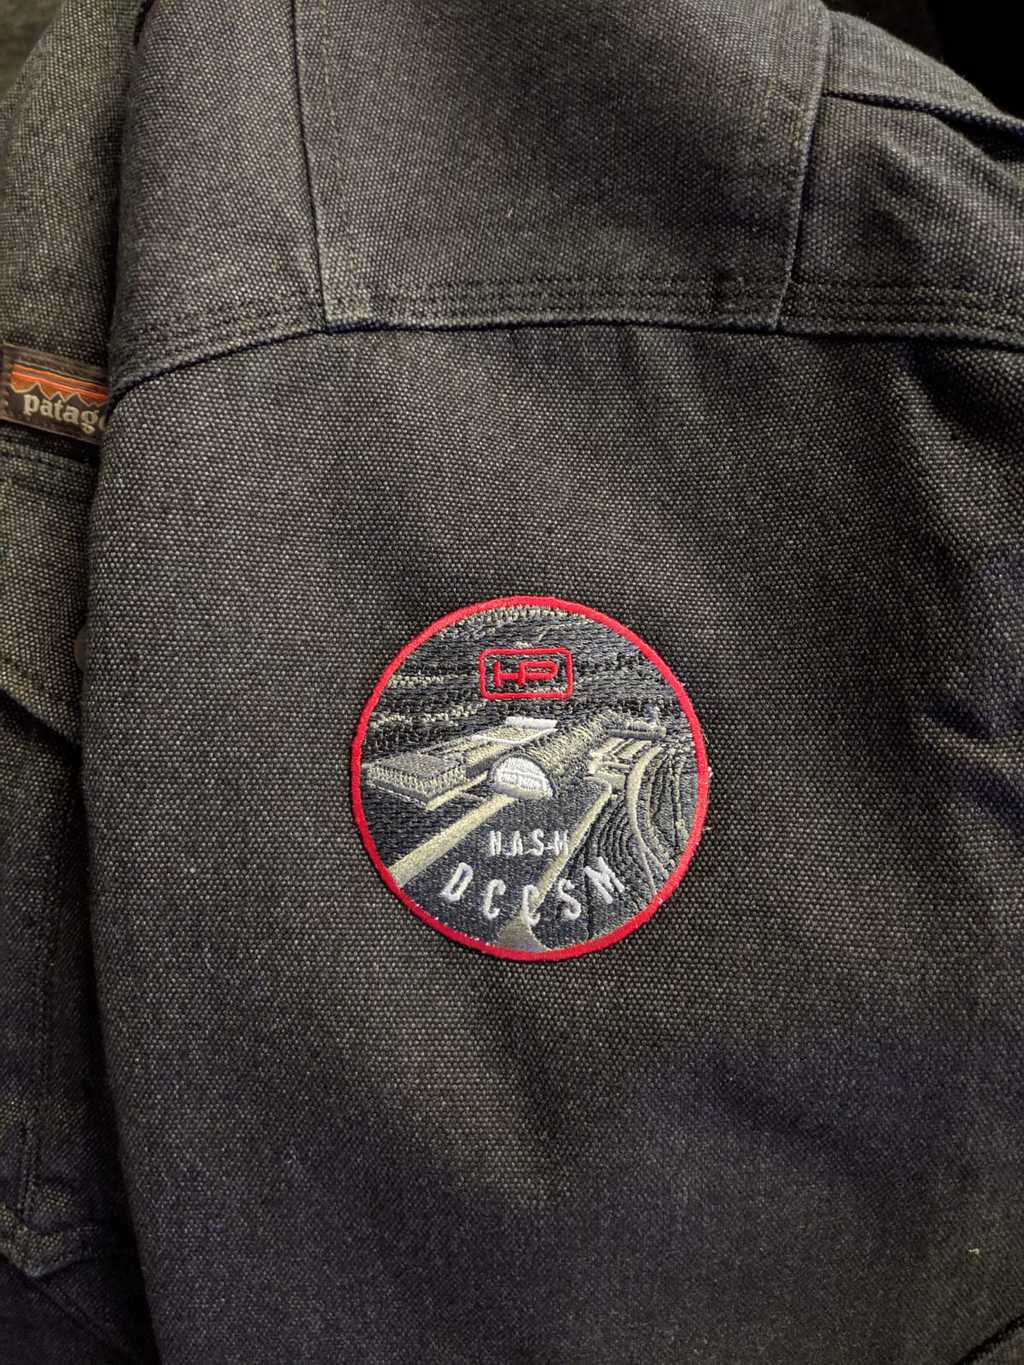 Assured print custom embroidery services near me (patch)